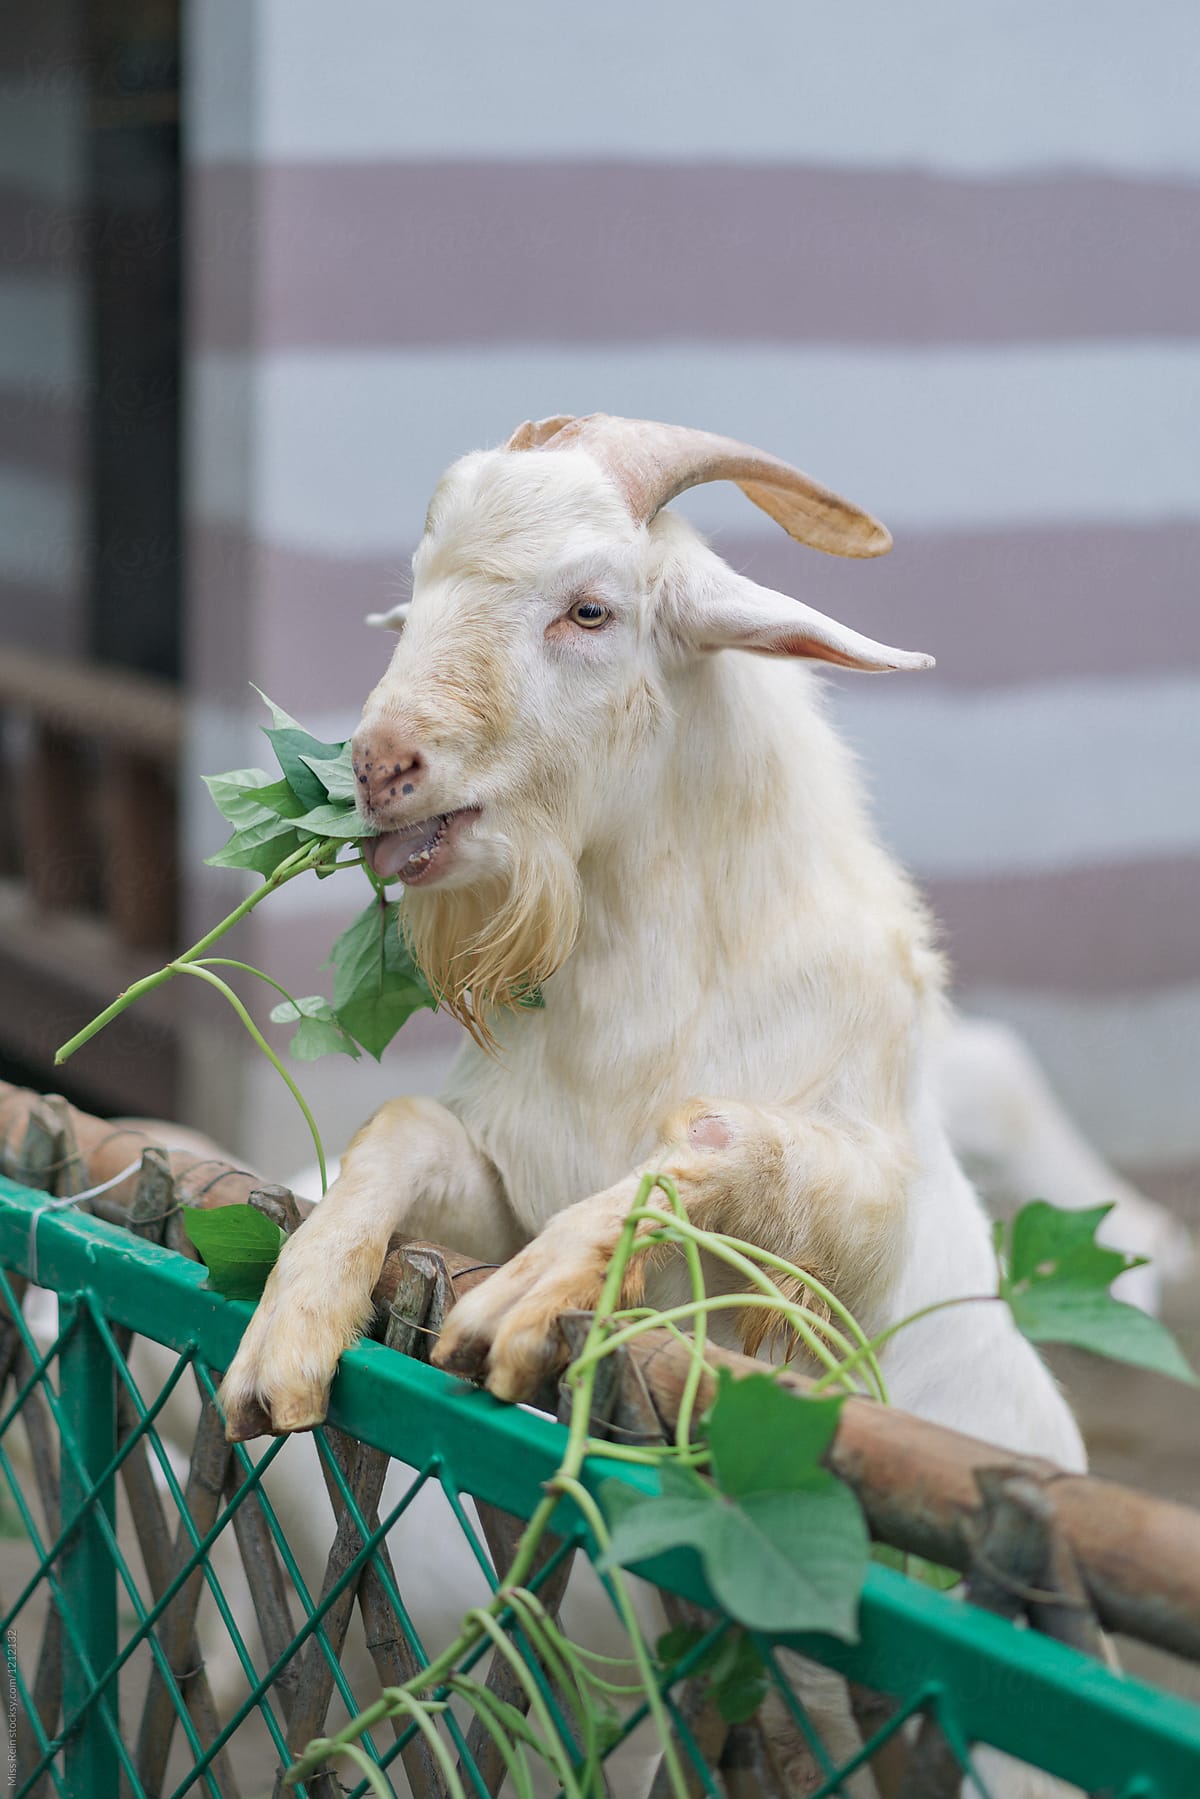 Chewing sheep with Sweet potato leaves